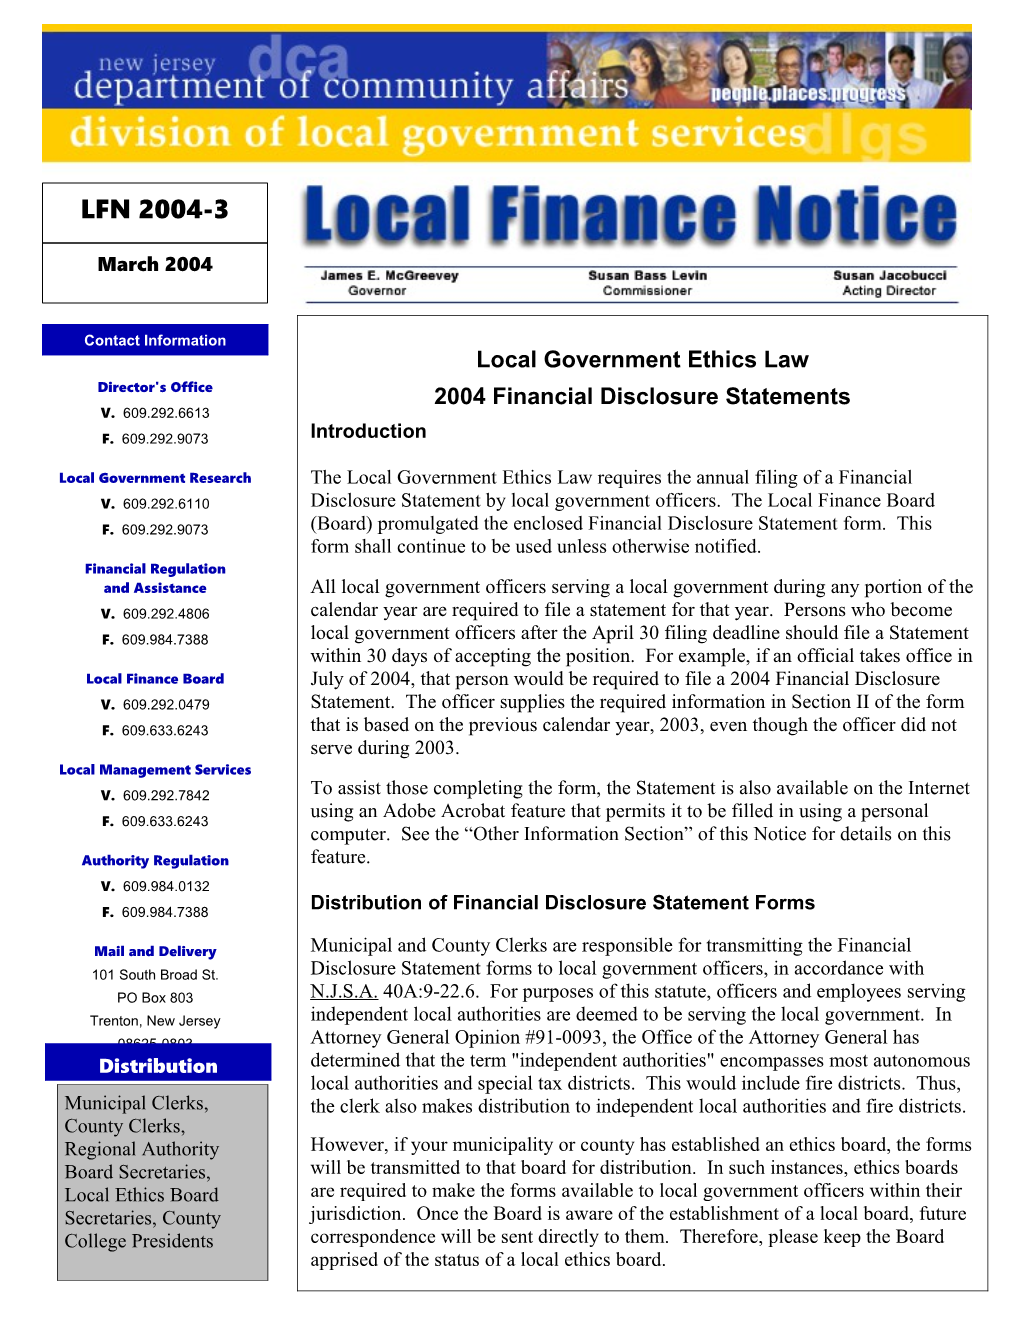 Local Finance Notice 2004-3March 2004Page 1